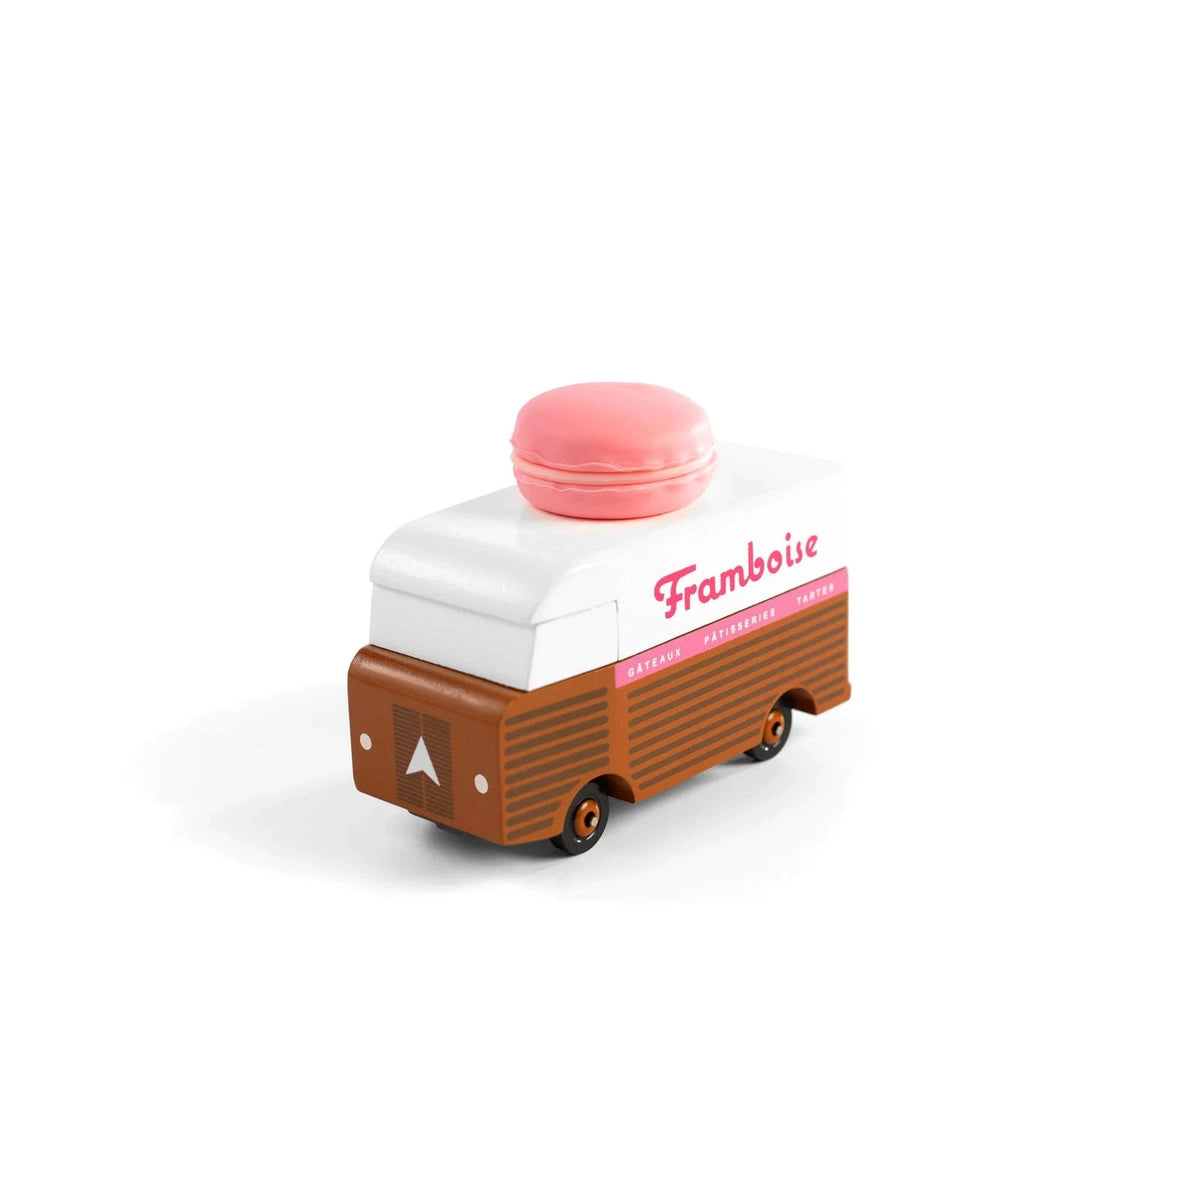 Candylab Candyvan cupcake van – Dilly Dally Kids